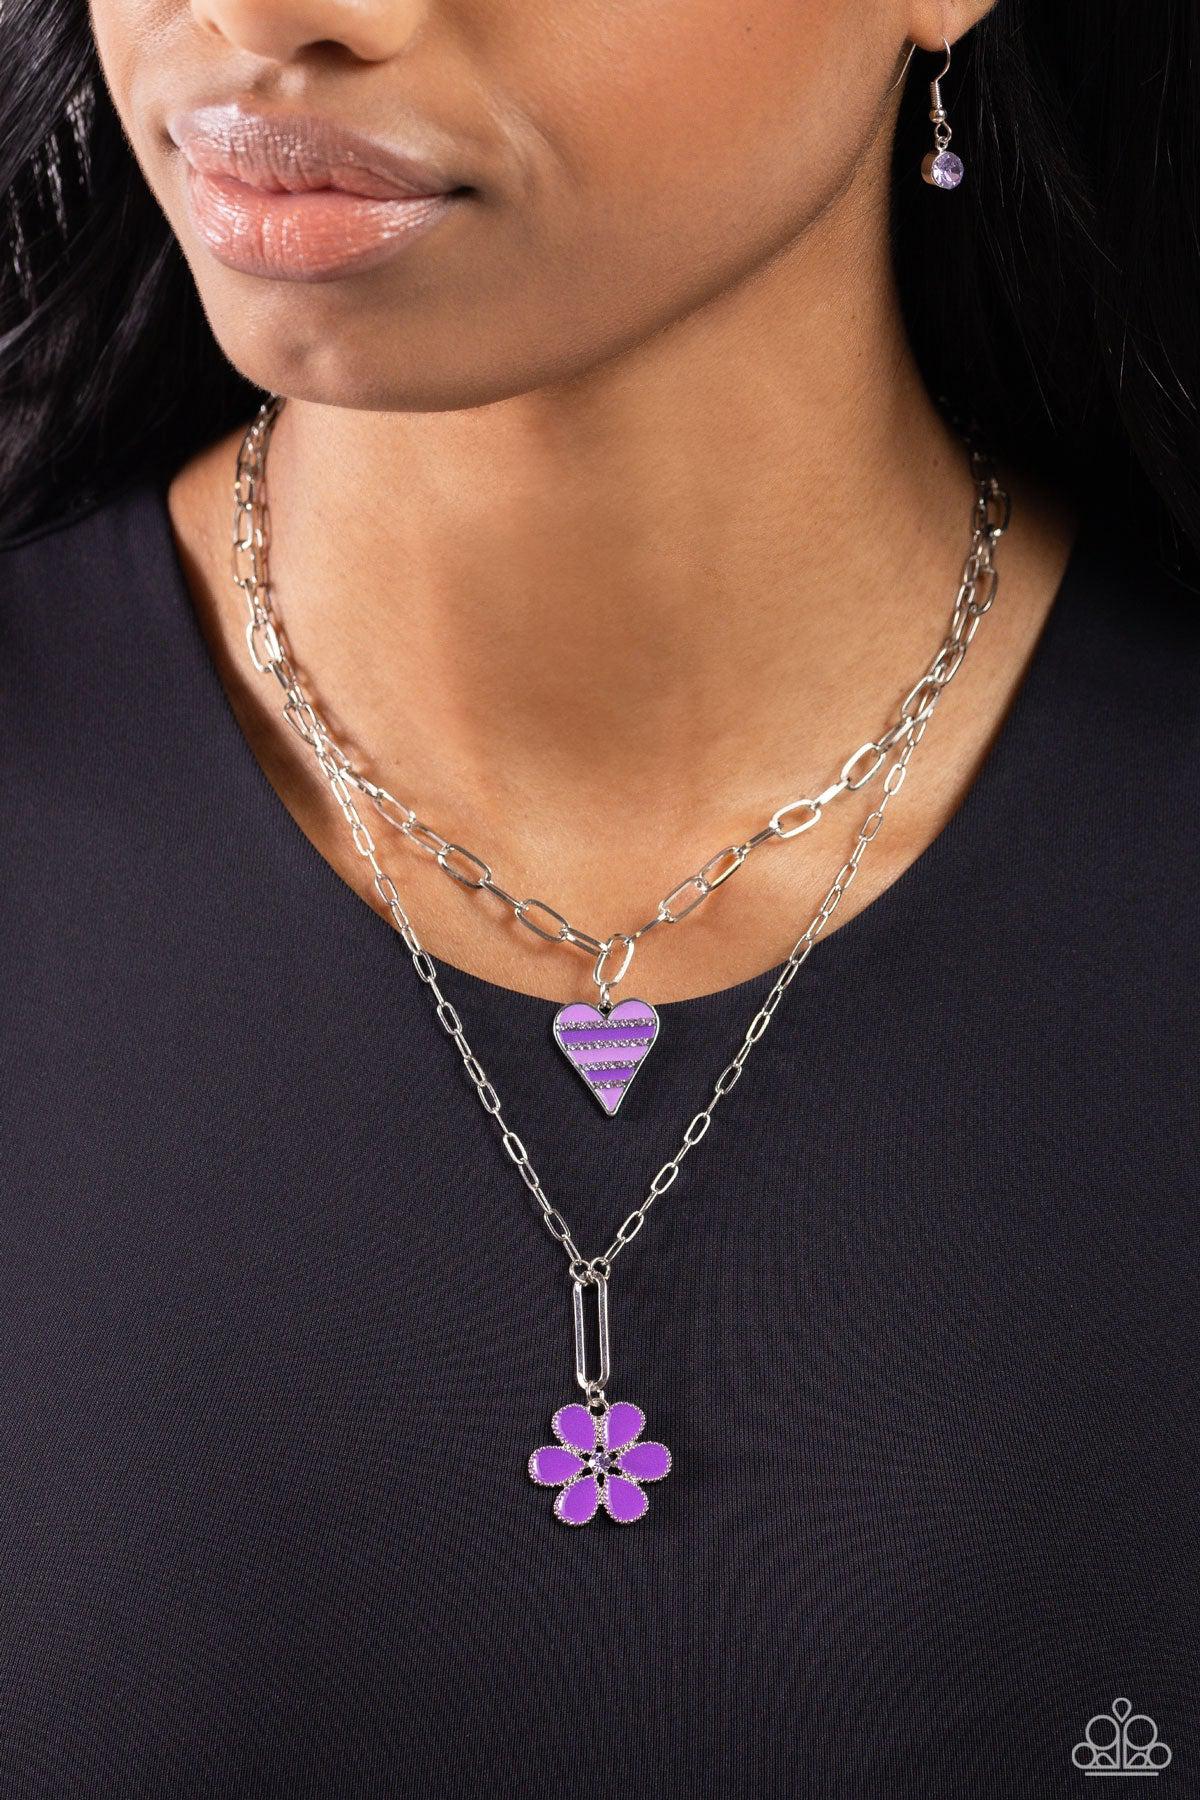 Childhood Charms Purple Heart &amp; Flower Necklace - Paparazzi Accessories-on model - CarasShop.com - $5 Jewelry by Cara Jewels